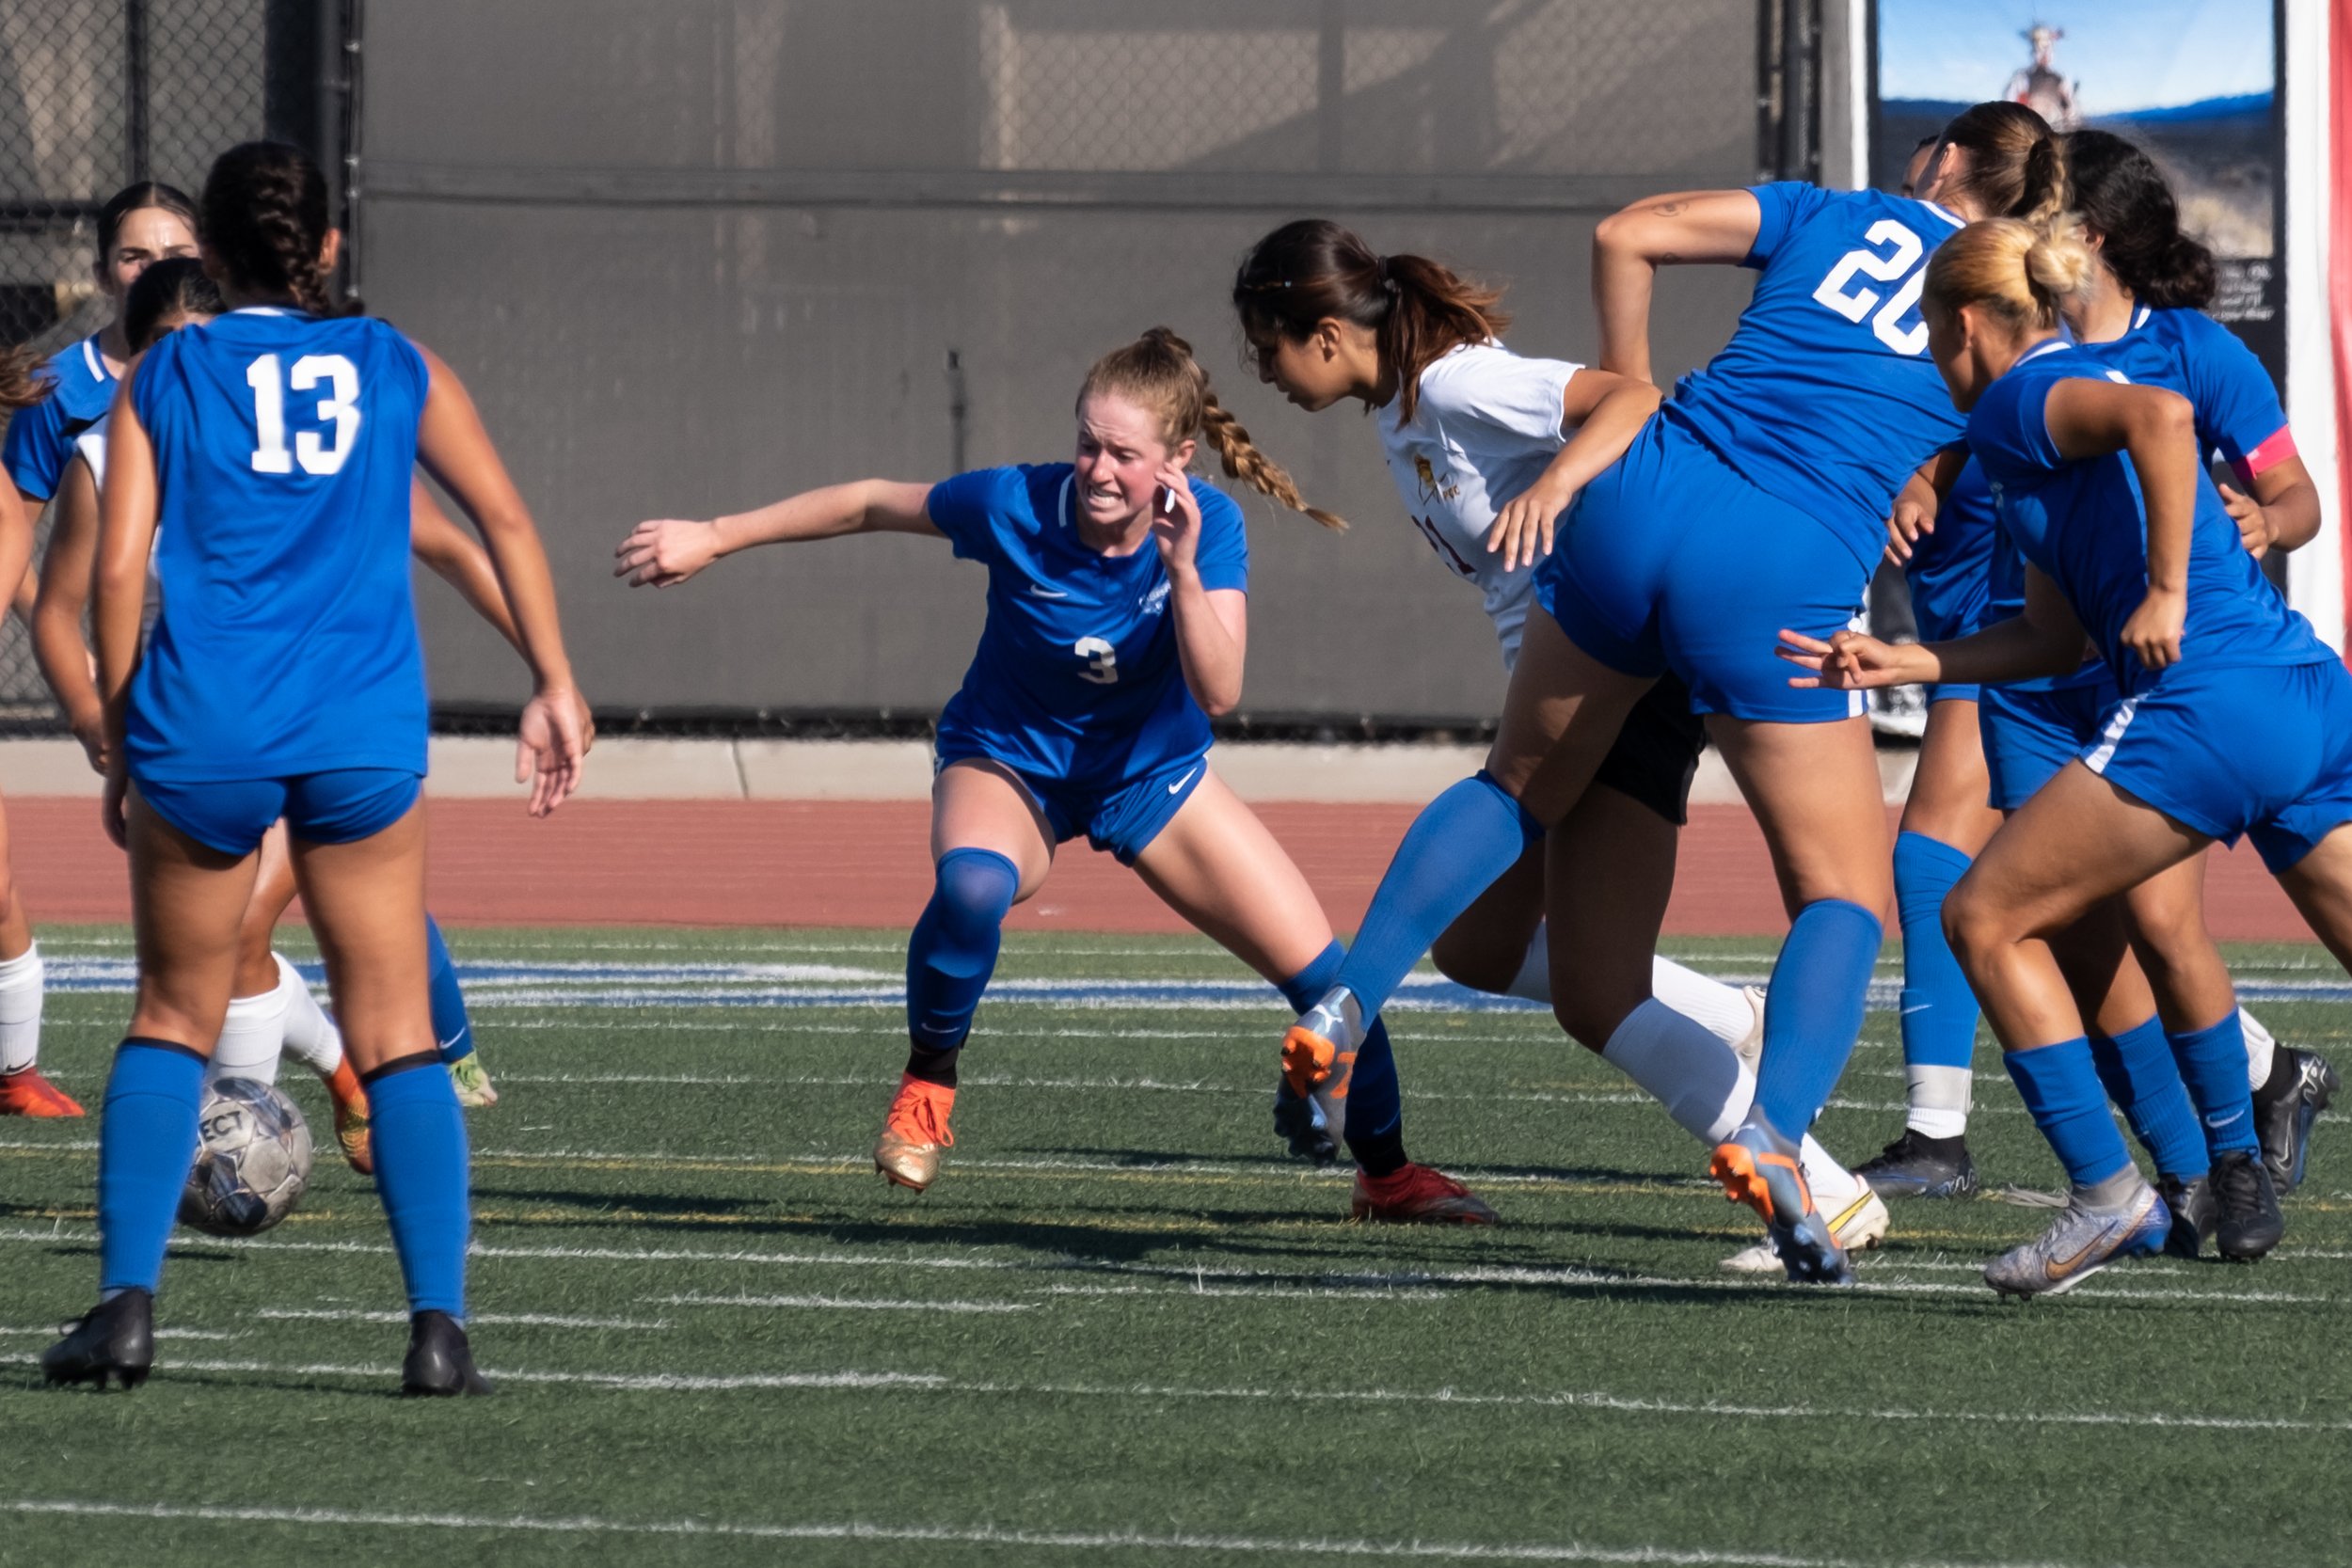  The Santa Monica College women's soccer team fighting hard as freshman defender Izzy Turner goes after the ball in the fourth game of the season, played against Pasadena City College at the Corsair Field in Santa Monica, Calif. on Friday, Sept. 6th,